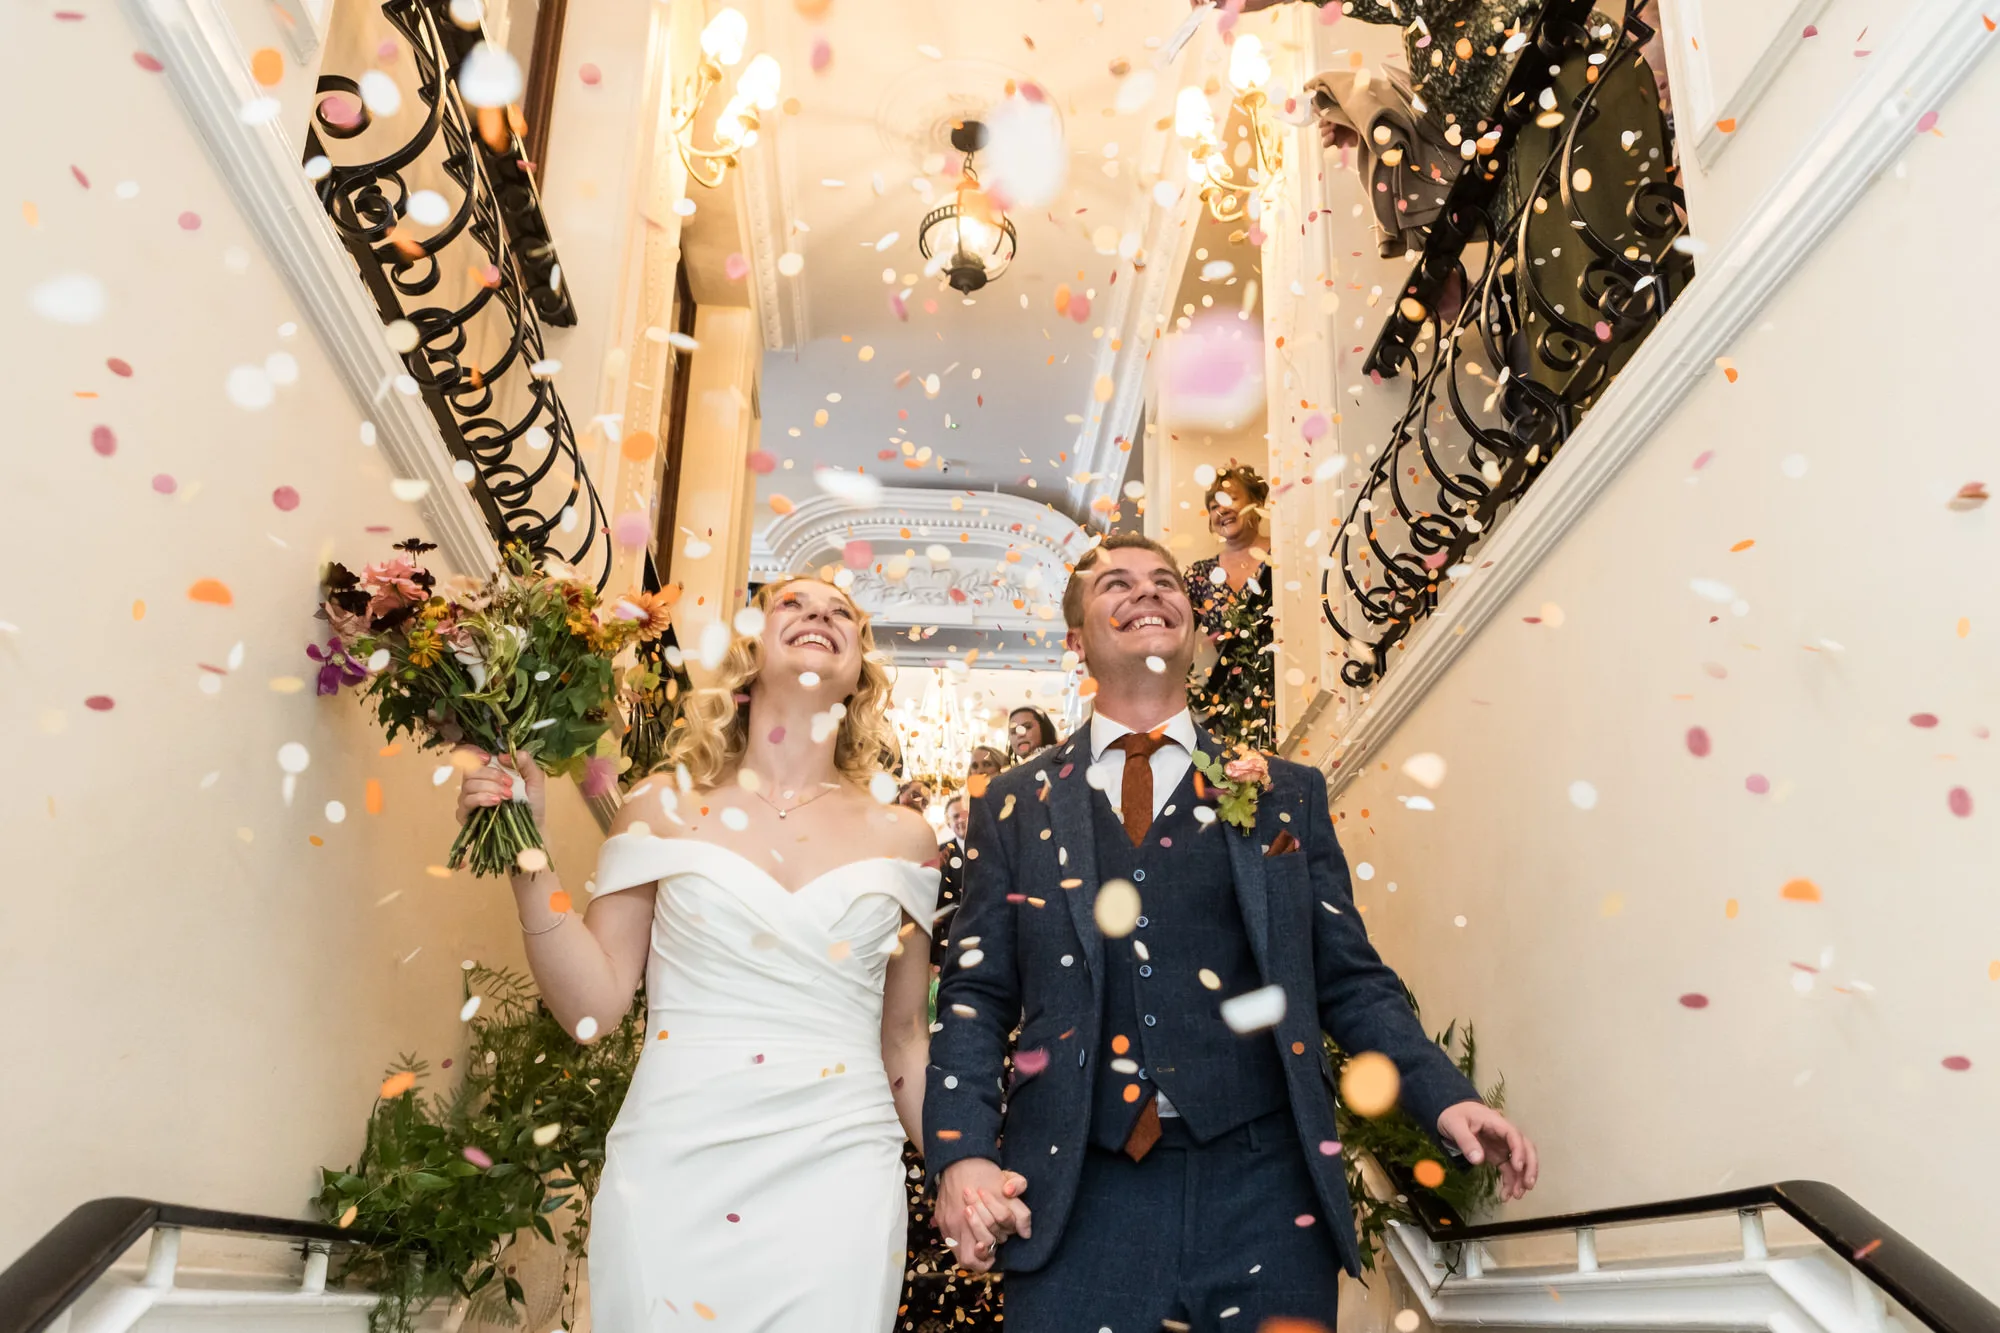 London wedding photographer - a couple exit their wedding venue being covered in confetti